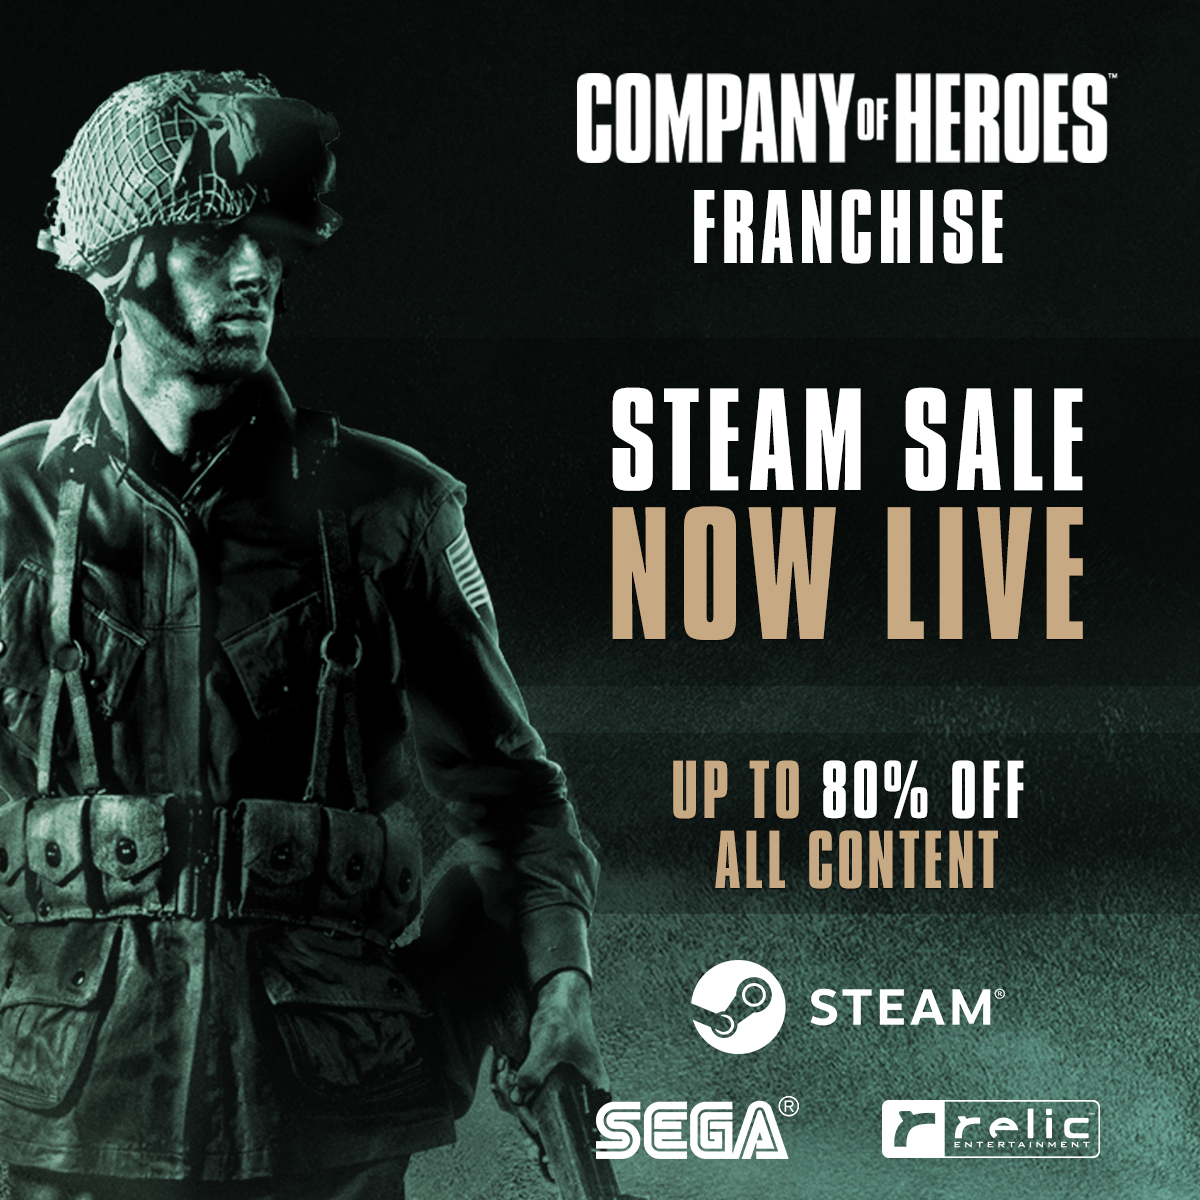 Battlefield Sale on Steam - up to 80% off